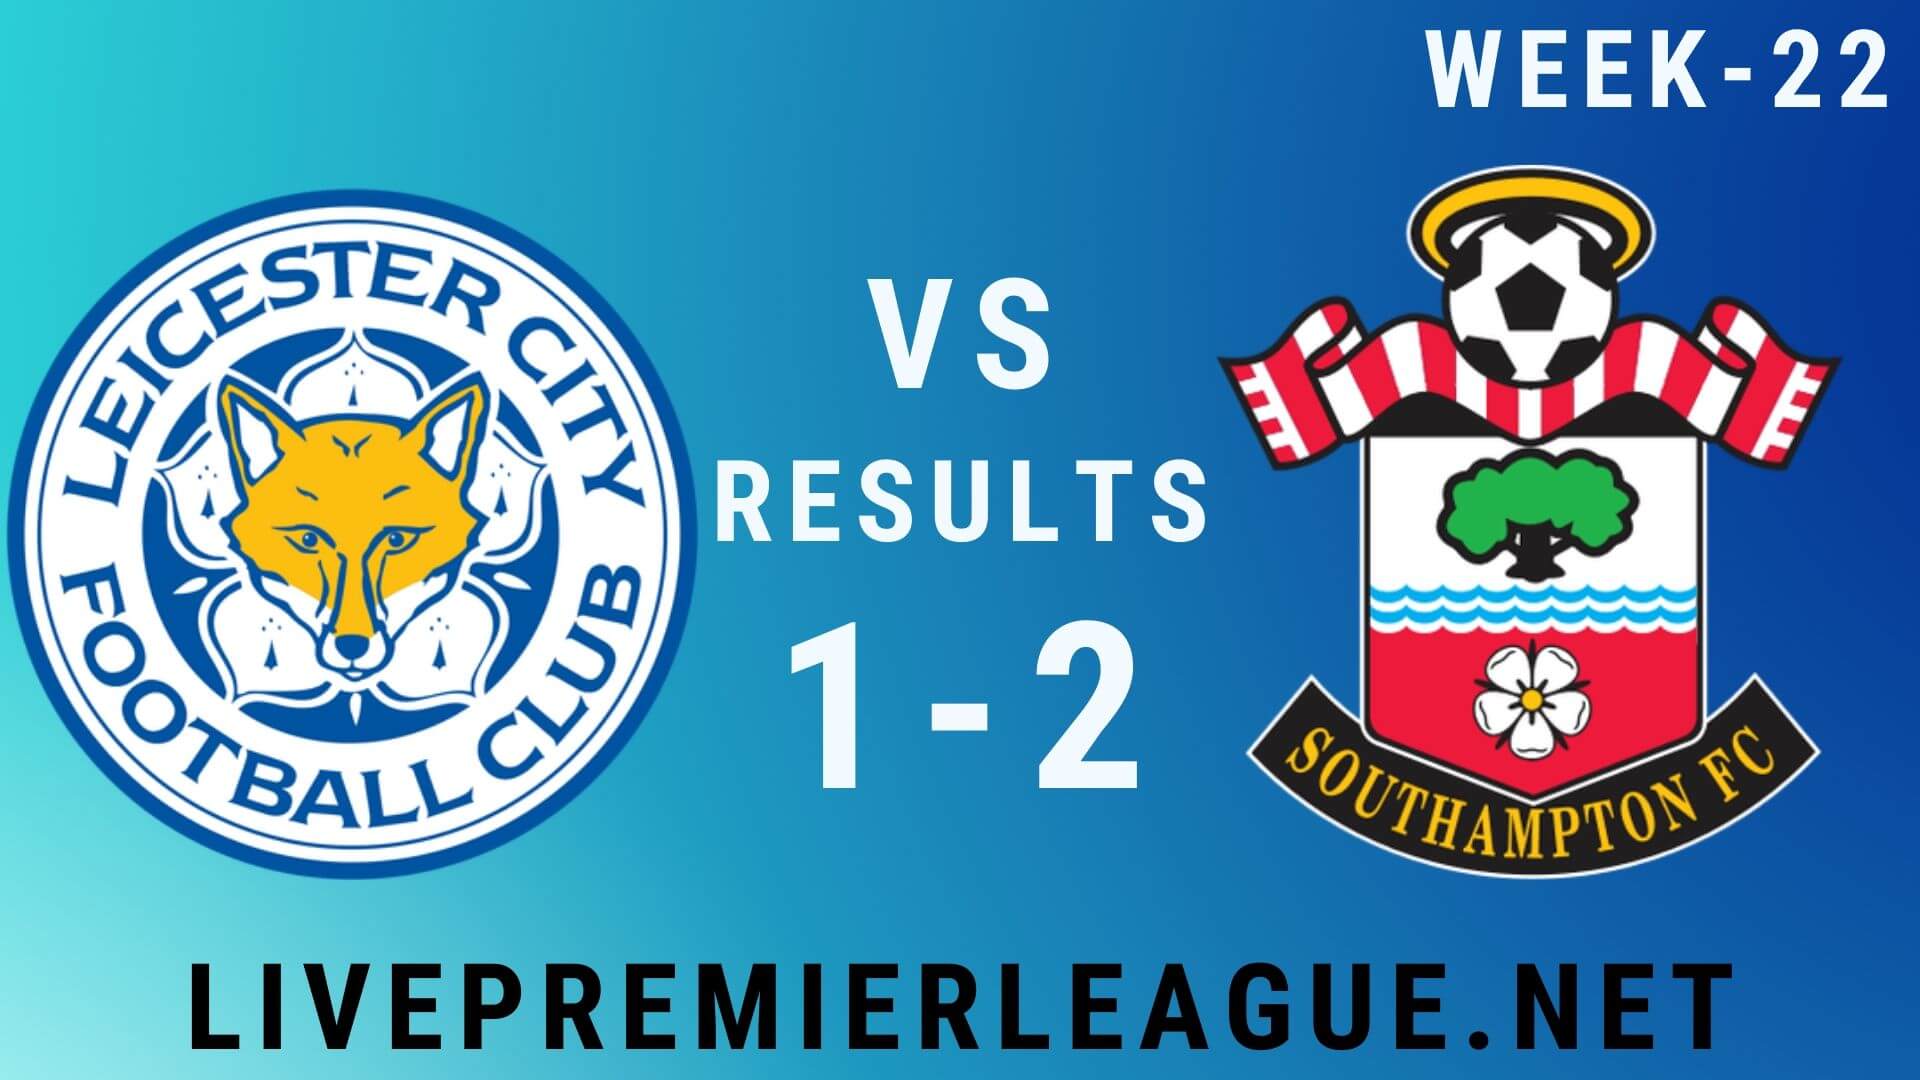 Leicester City Vs Southampton | Week 22 Result 2020